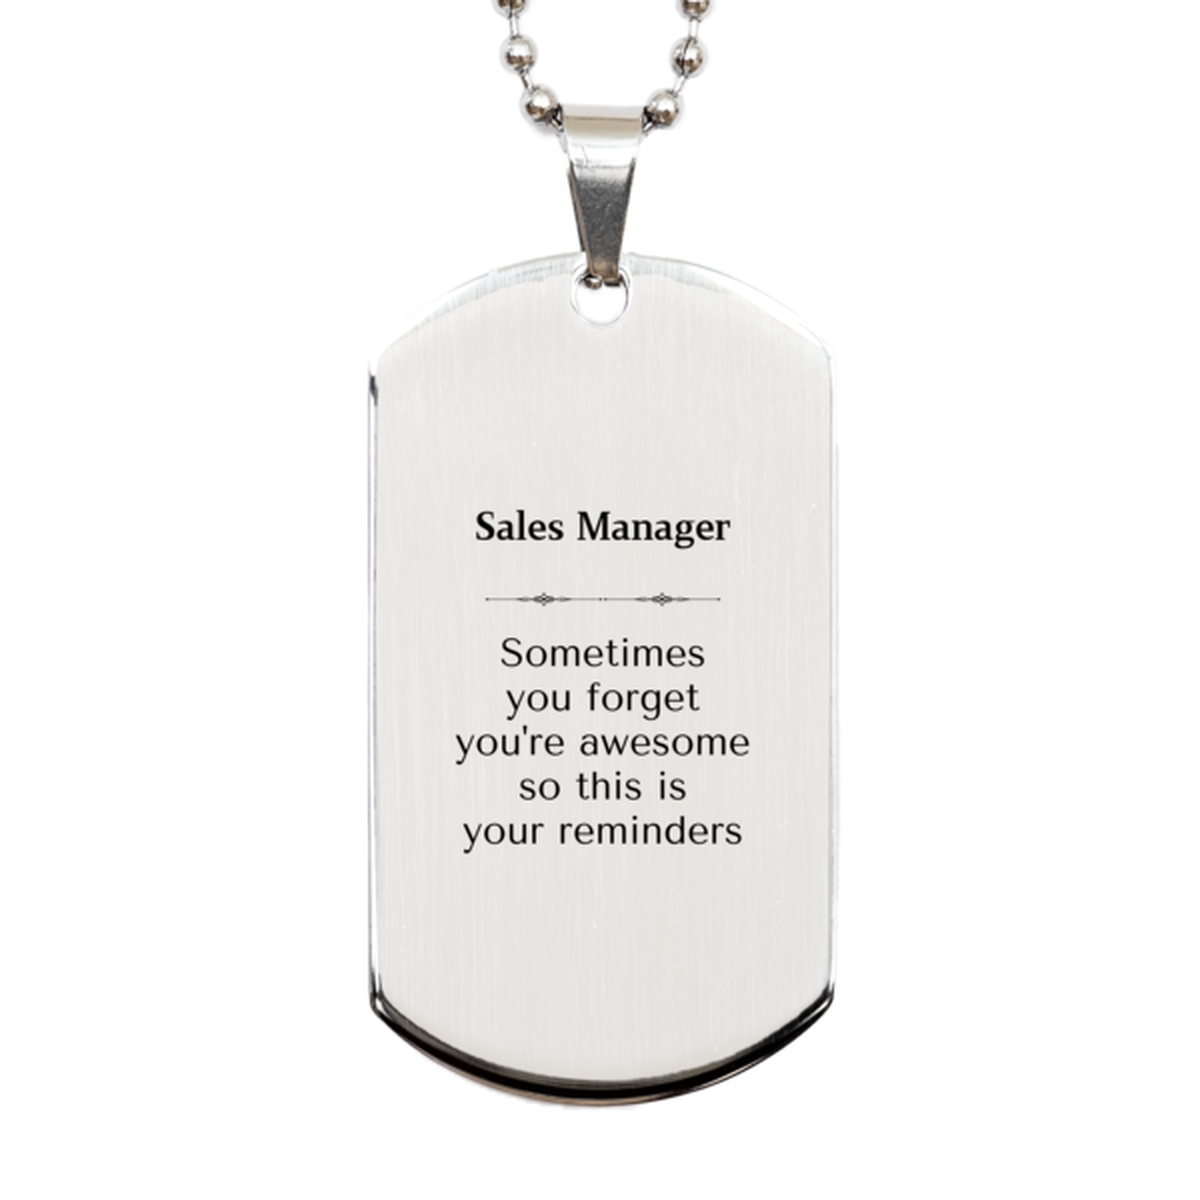 Sentimental Sales Manager Silver Dog Tag, Sales Manager Sometimes you forget you're awesome so this is your reminders, Graduation Christmas Birthday Gifts for Sales Manager, Men, Women, Coworkers